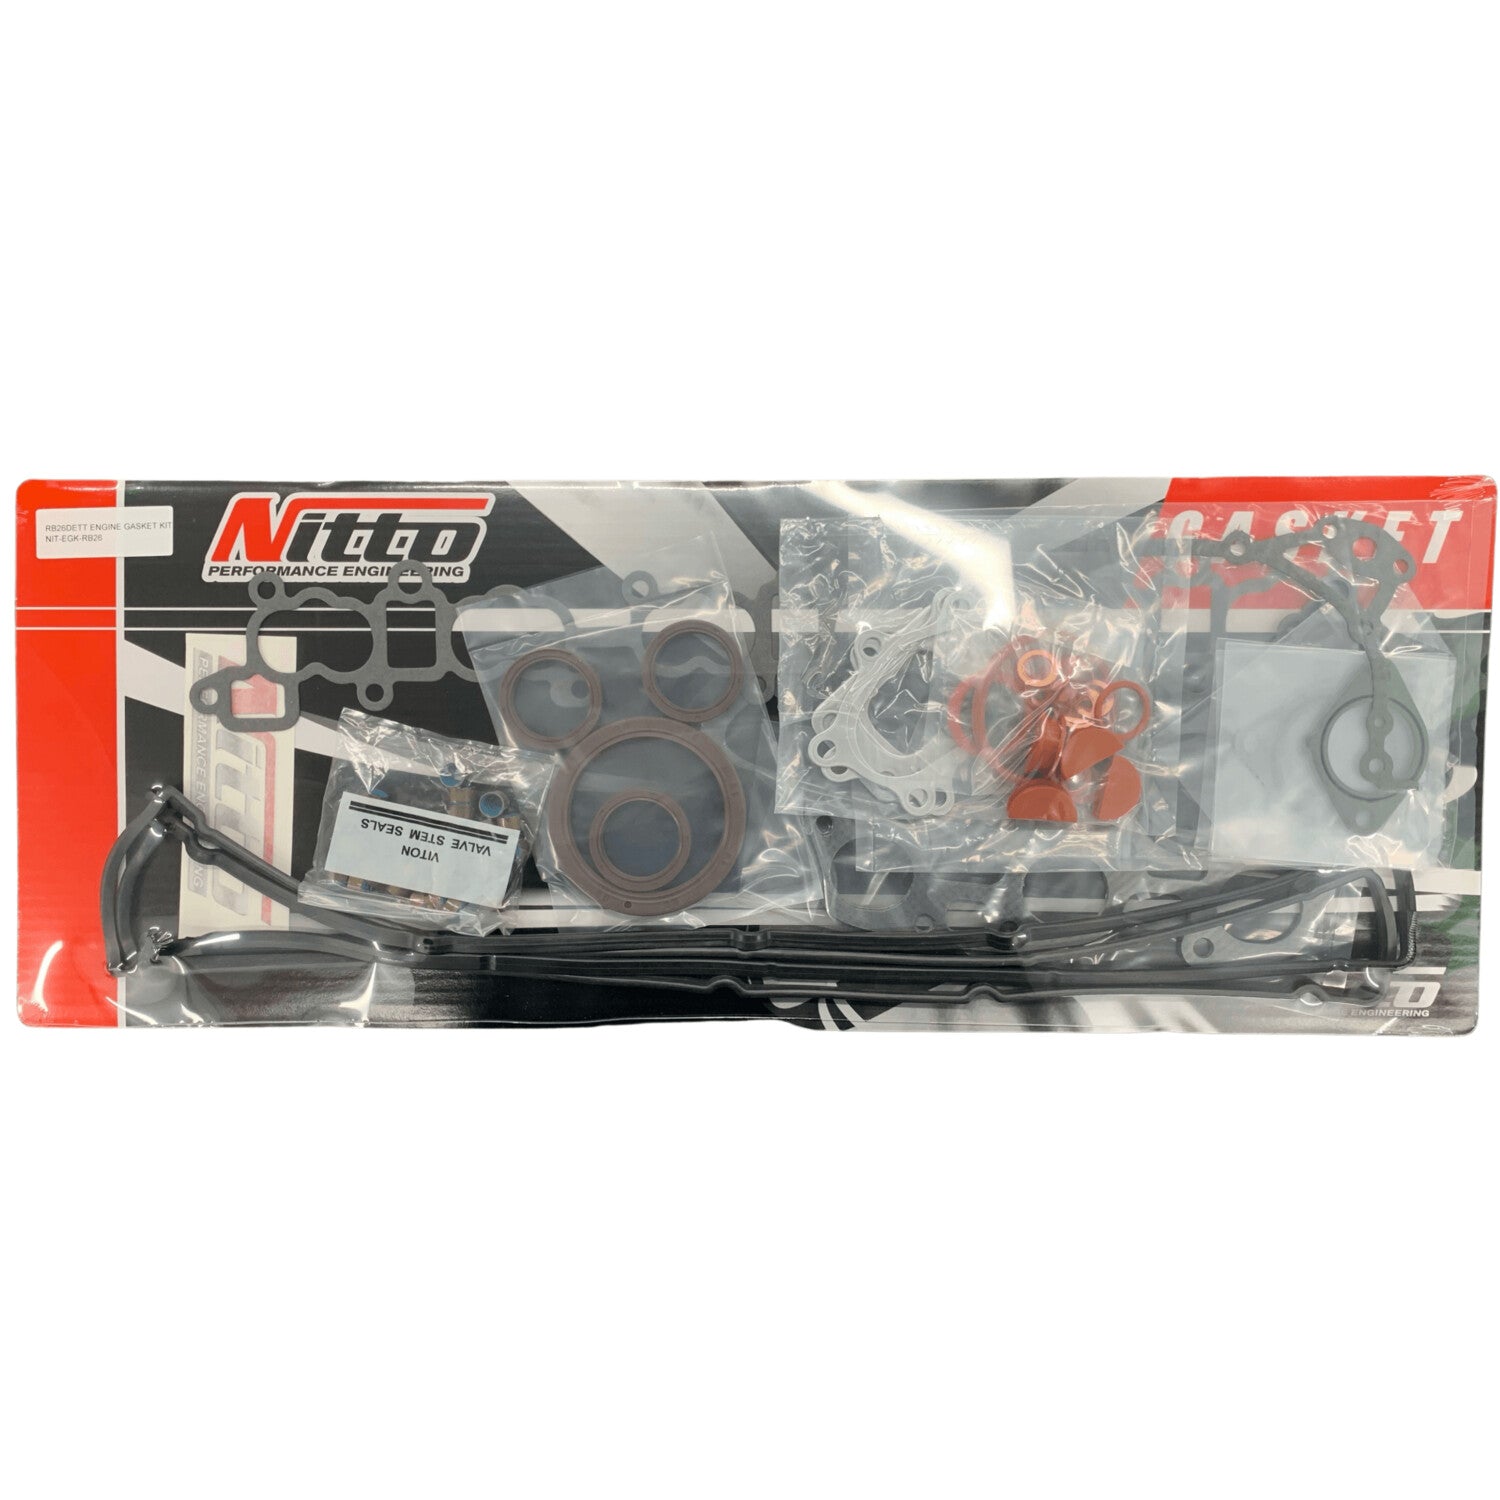 Nitto RB26 Engine Gasket Kit (no head gasket included)